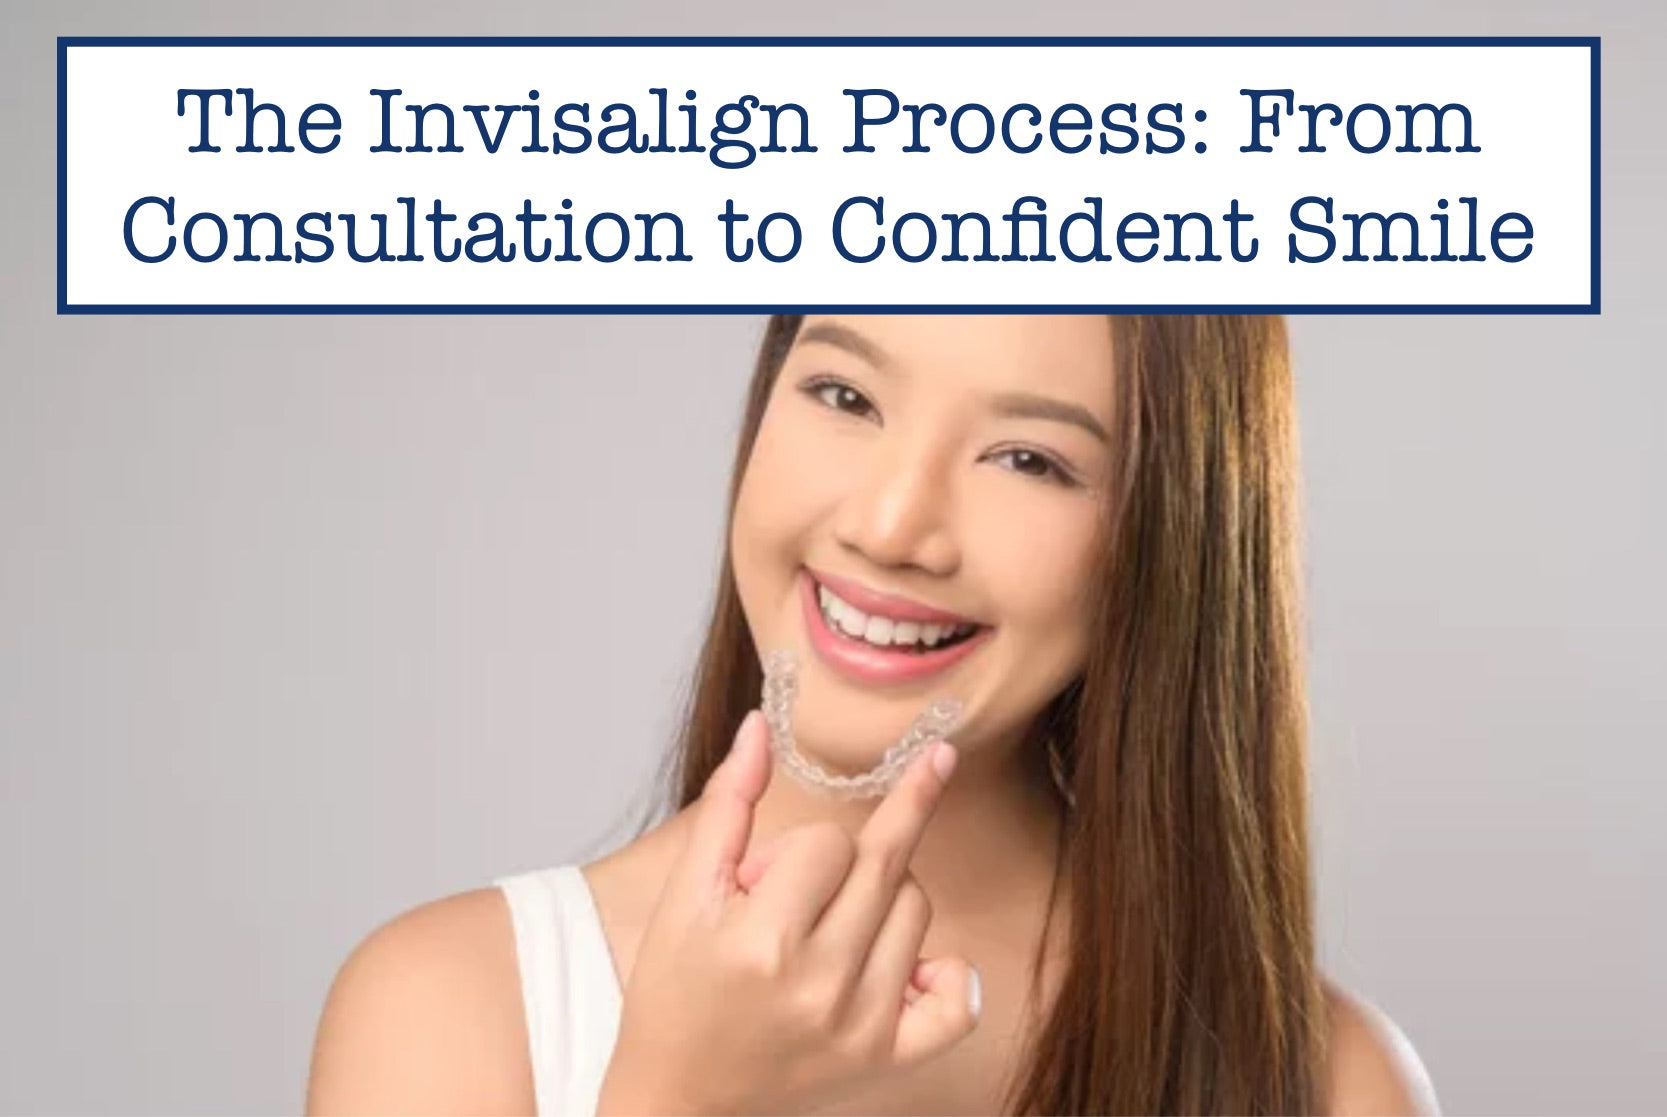 The Invisalign Process: From Consultation to Confident Smile